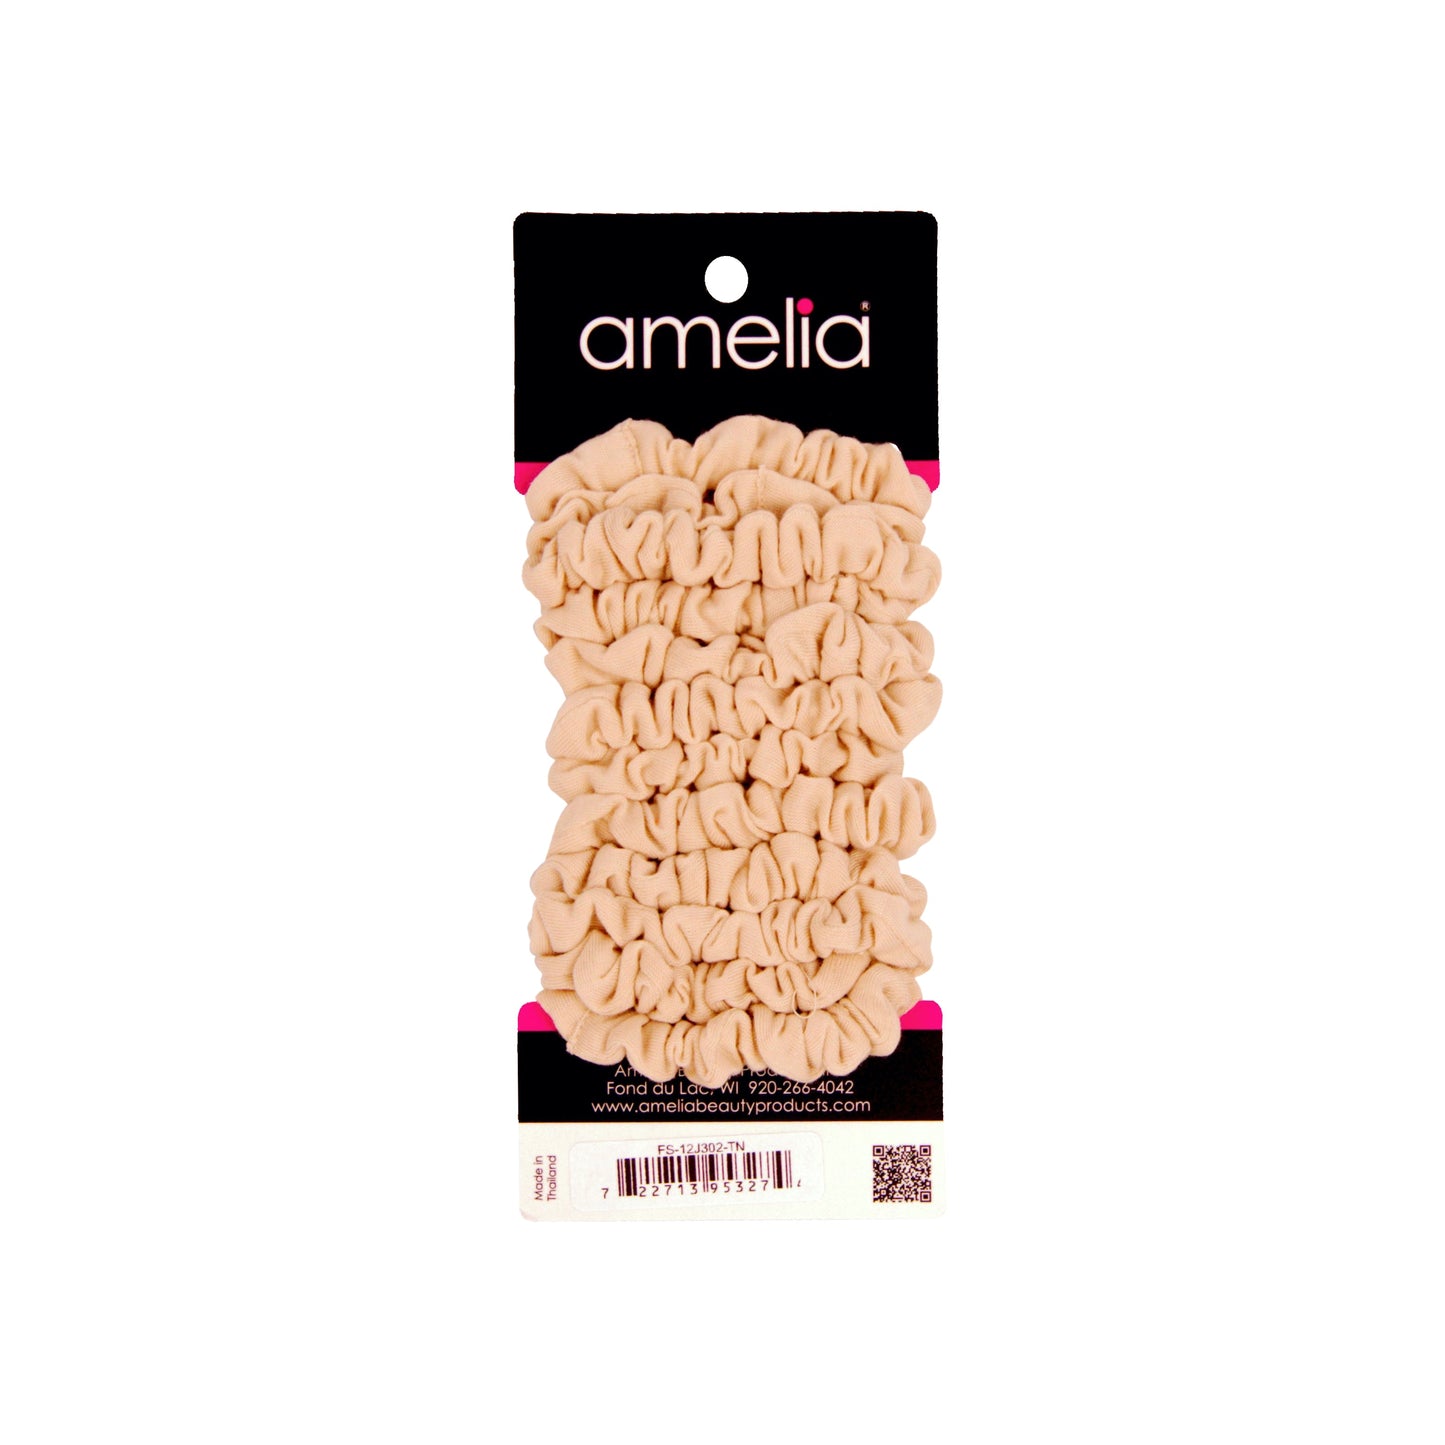 Amelia Beauty, Tan Jersey Scrunchies, 2.25in Diameter, Gentle on Hair, Strong Hold, No Snag, No Dents or Creases. 12 Pack - 12 Retail Packs